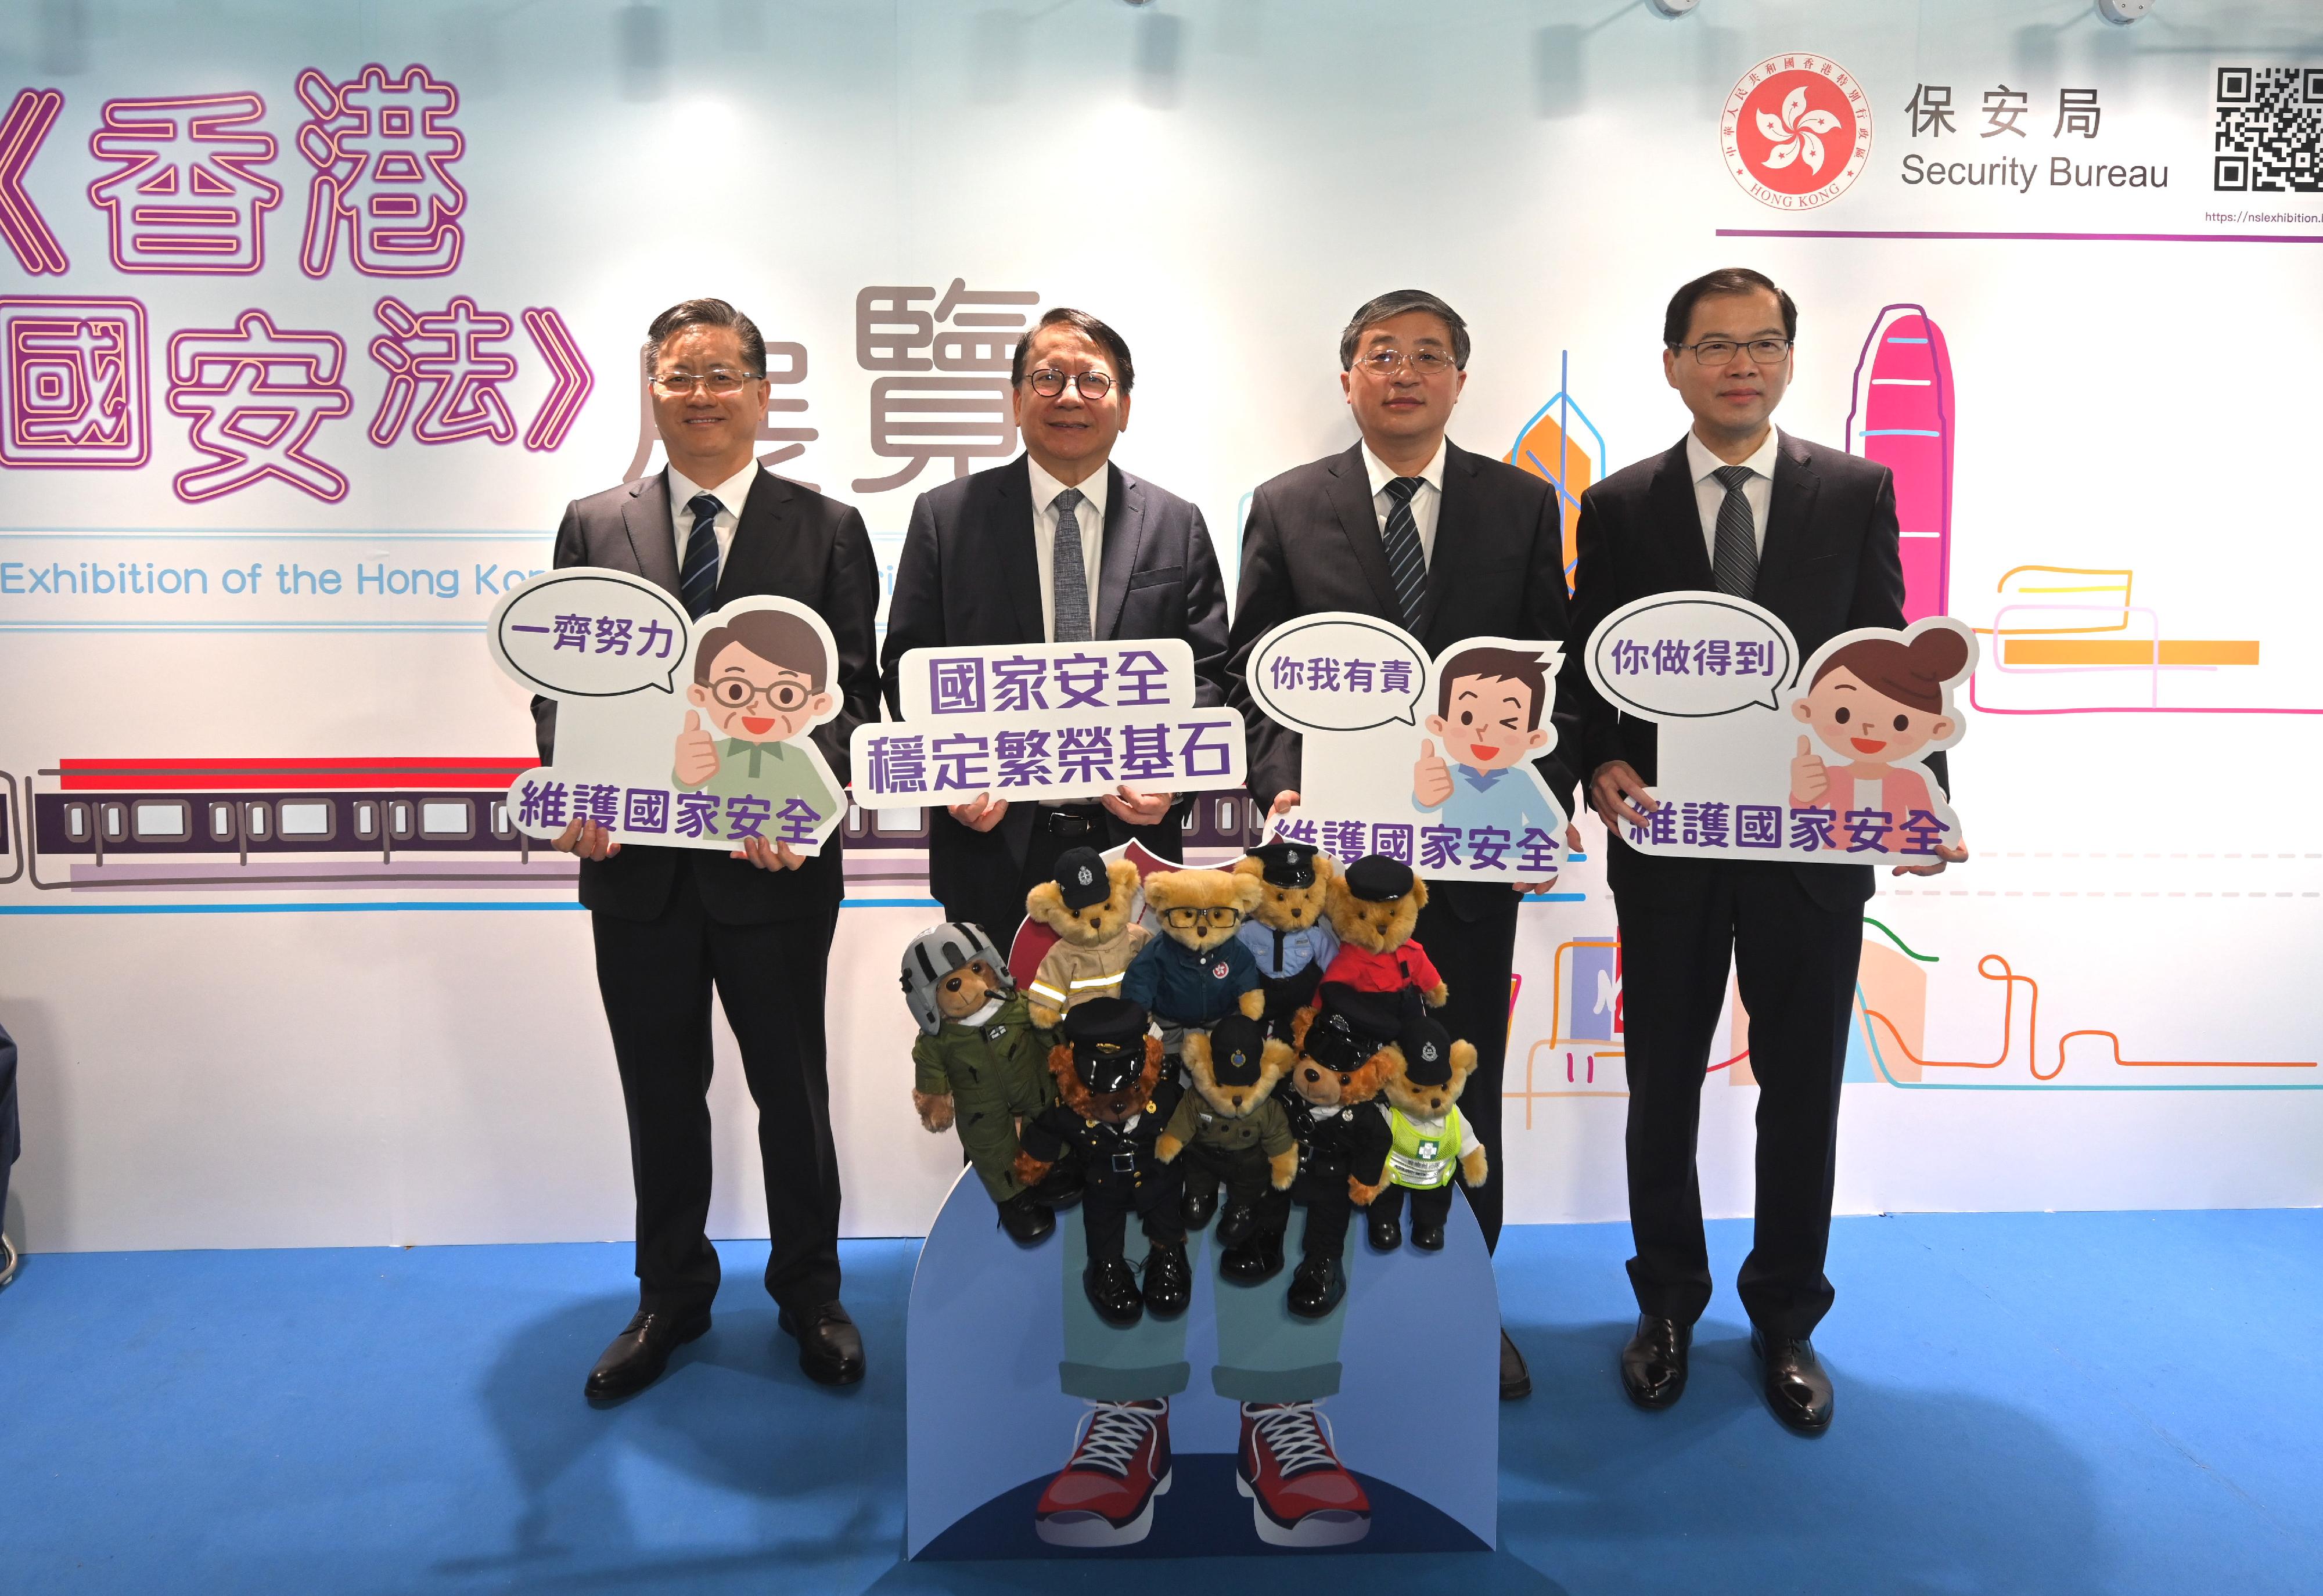 The Chief Secretary for Administration, Mr Chan Kwok-ki, attended the National Security Education Day flag raising ceremony today (April 15). Photo shows Mr Chan (second left) pictured with Deputy Director of the Liaison Office of the Central People's Government in the Hong Kong Special Administrative Region (HKSAR) Mr Luo Yonggang (second right); Deputy Head of the Office for Safeguarding National Security of the Central People's Government in the HKSAR Mr Li Jiangzhou (first left); and the Secretary General of the Committee for Safeguarding National Security of the HKSAR, Mr Sonny Au (first right) after visiting and rating the design of the booths of the Disciplined Forces National Security Education Promotion Competition.